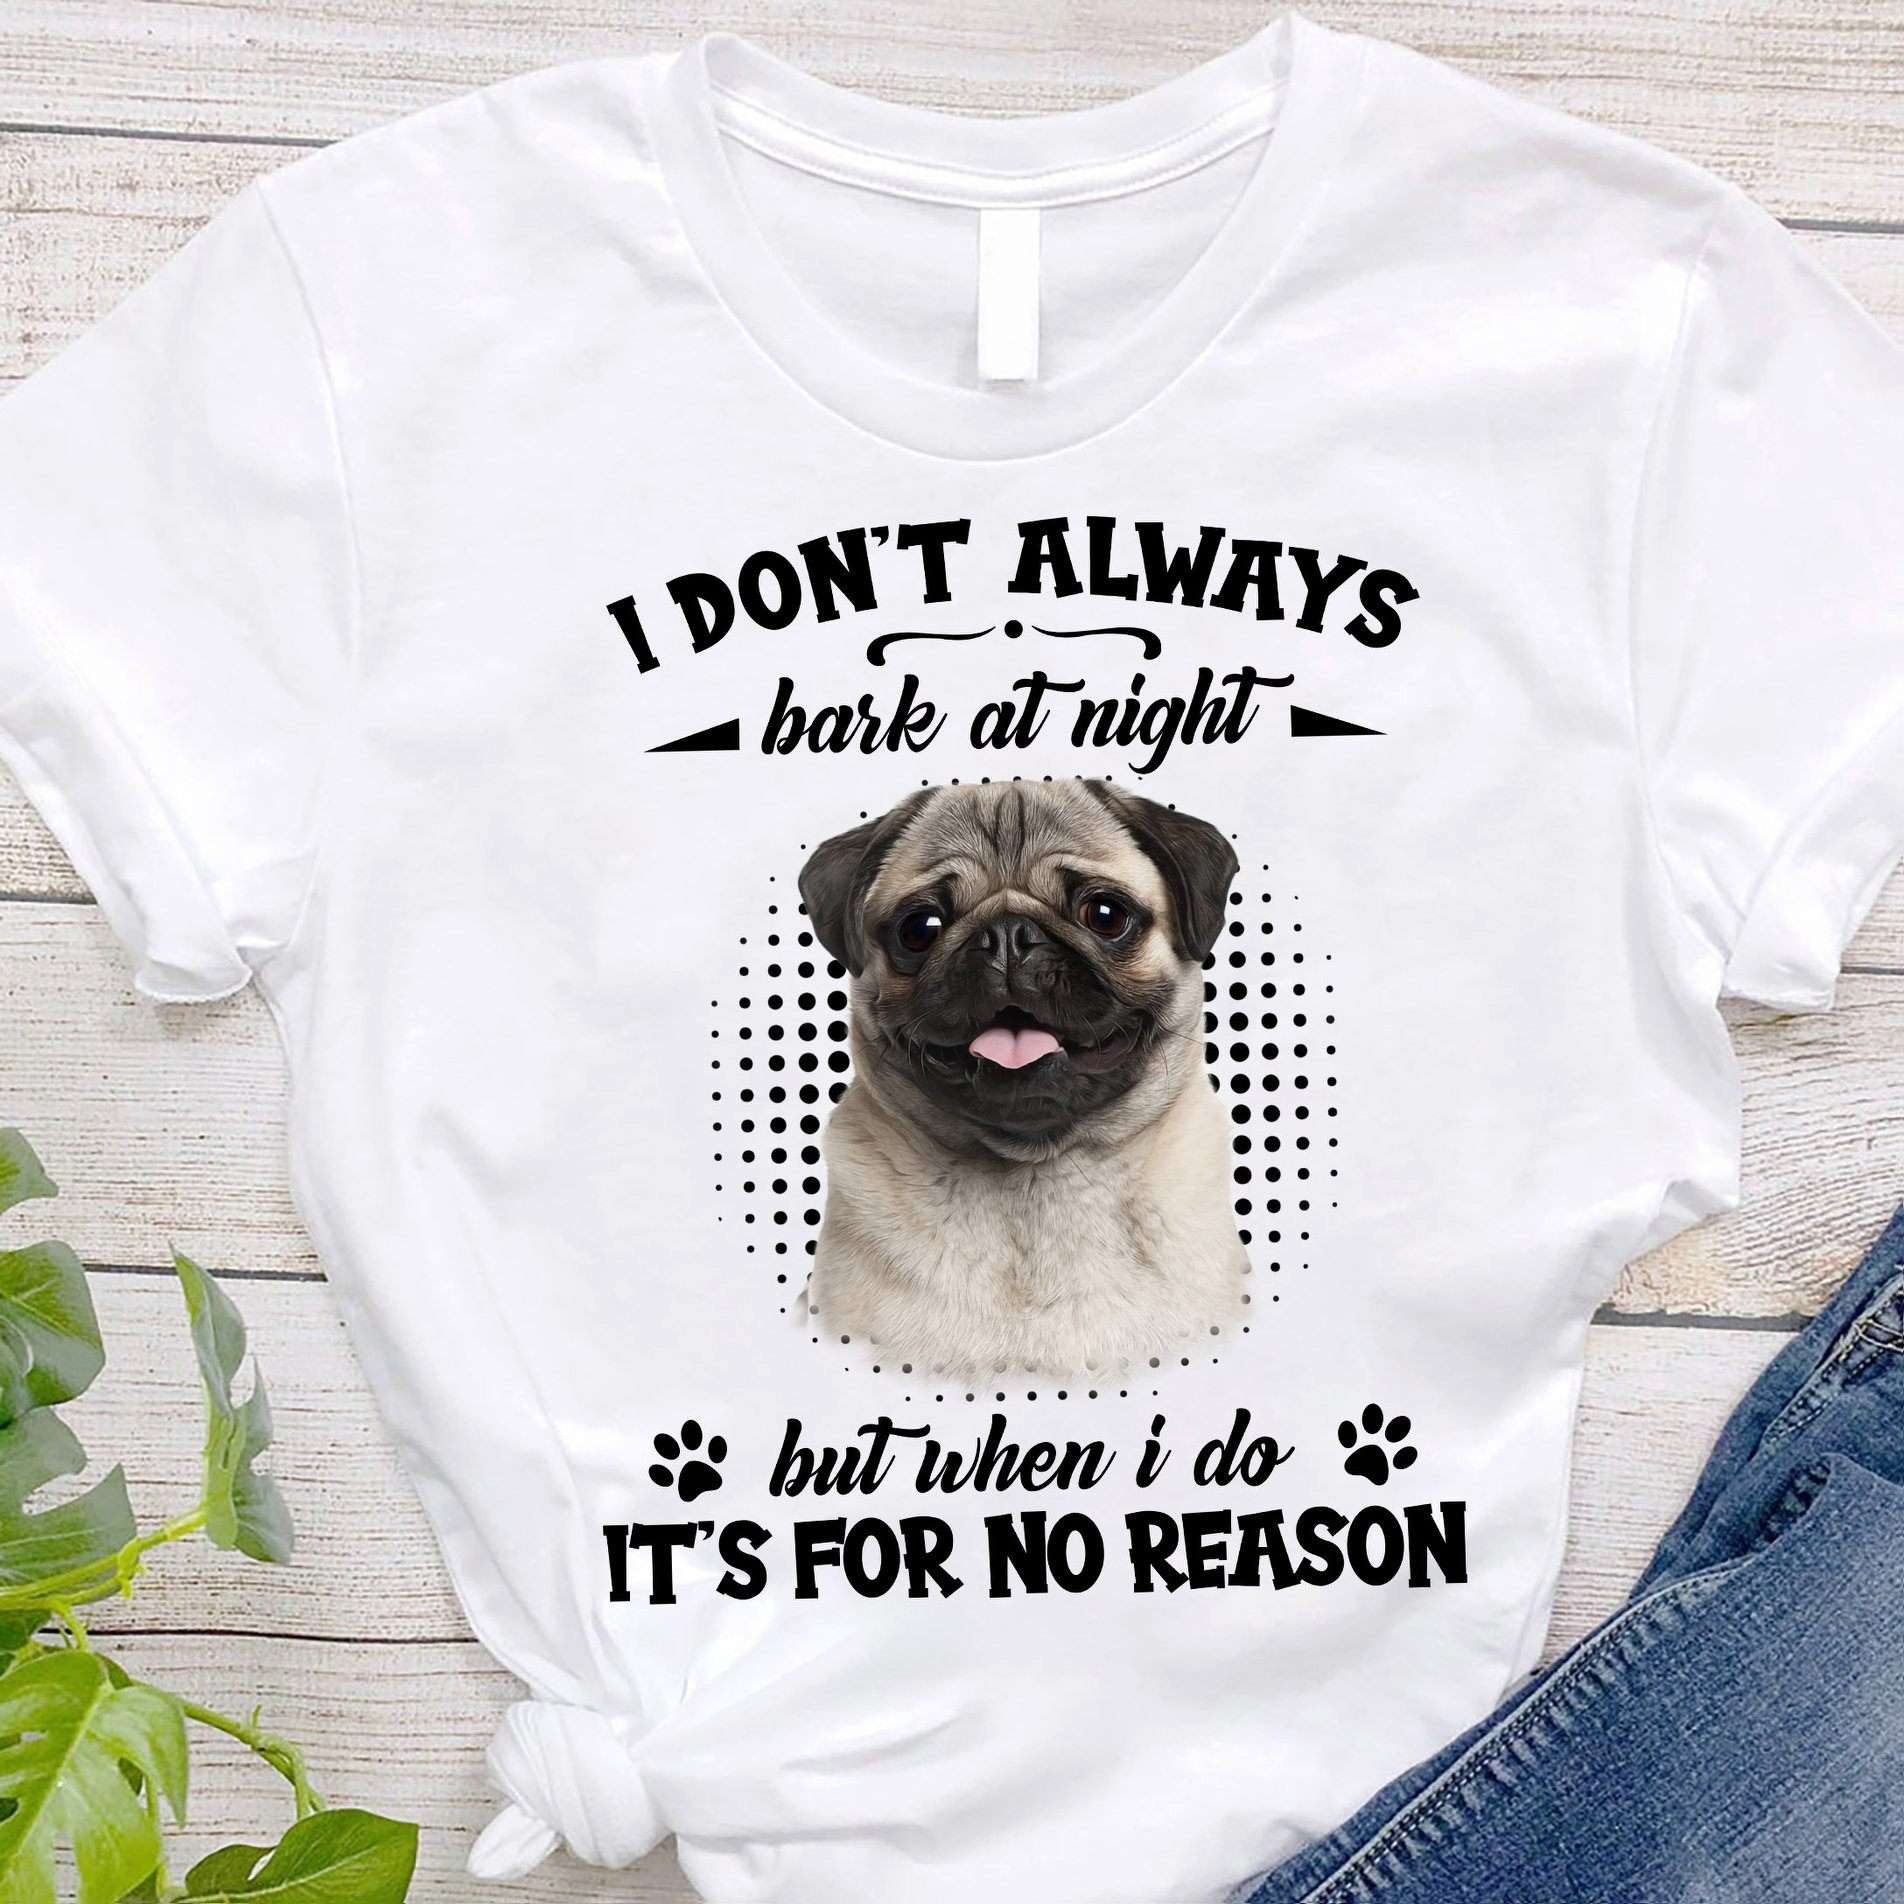 I don't always bark at night but when I do It's for no reason - Pug dog barking